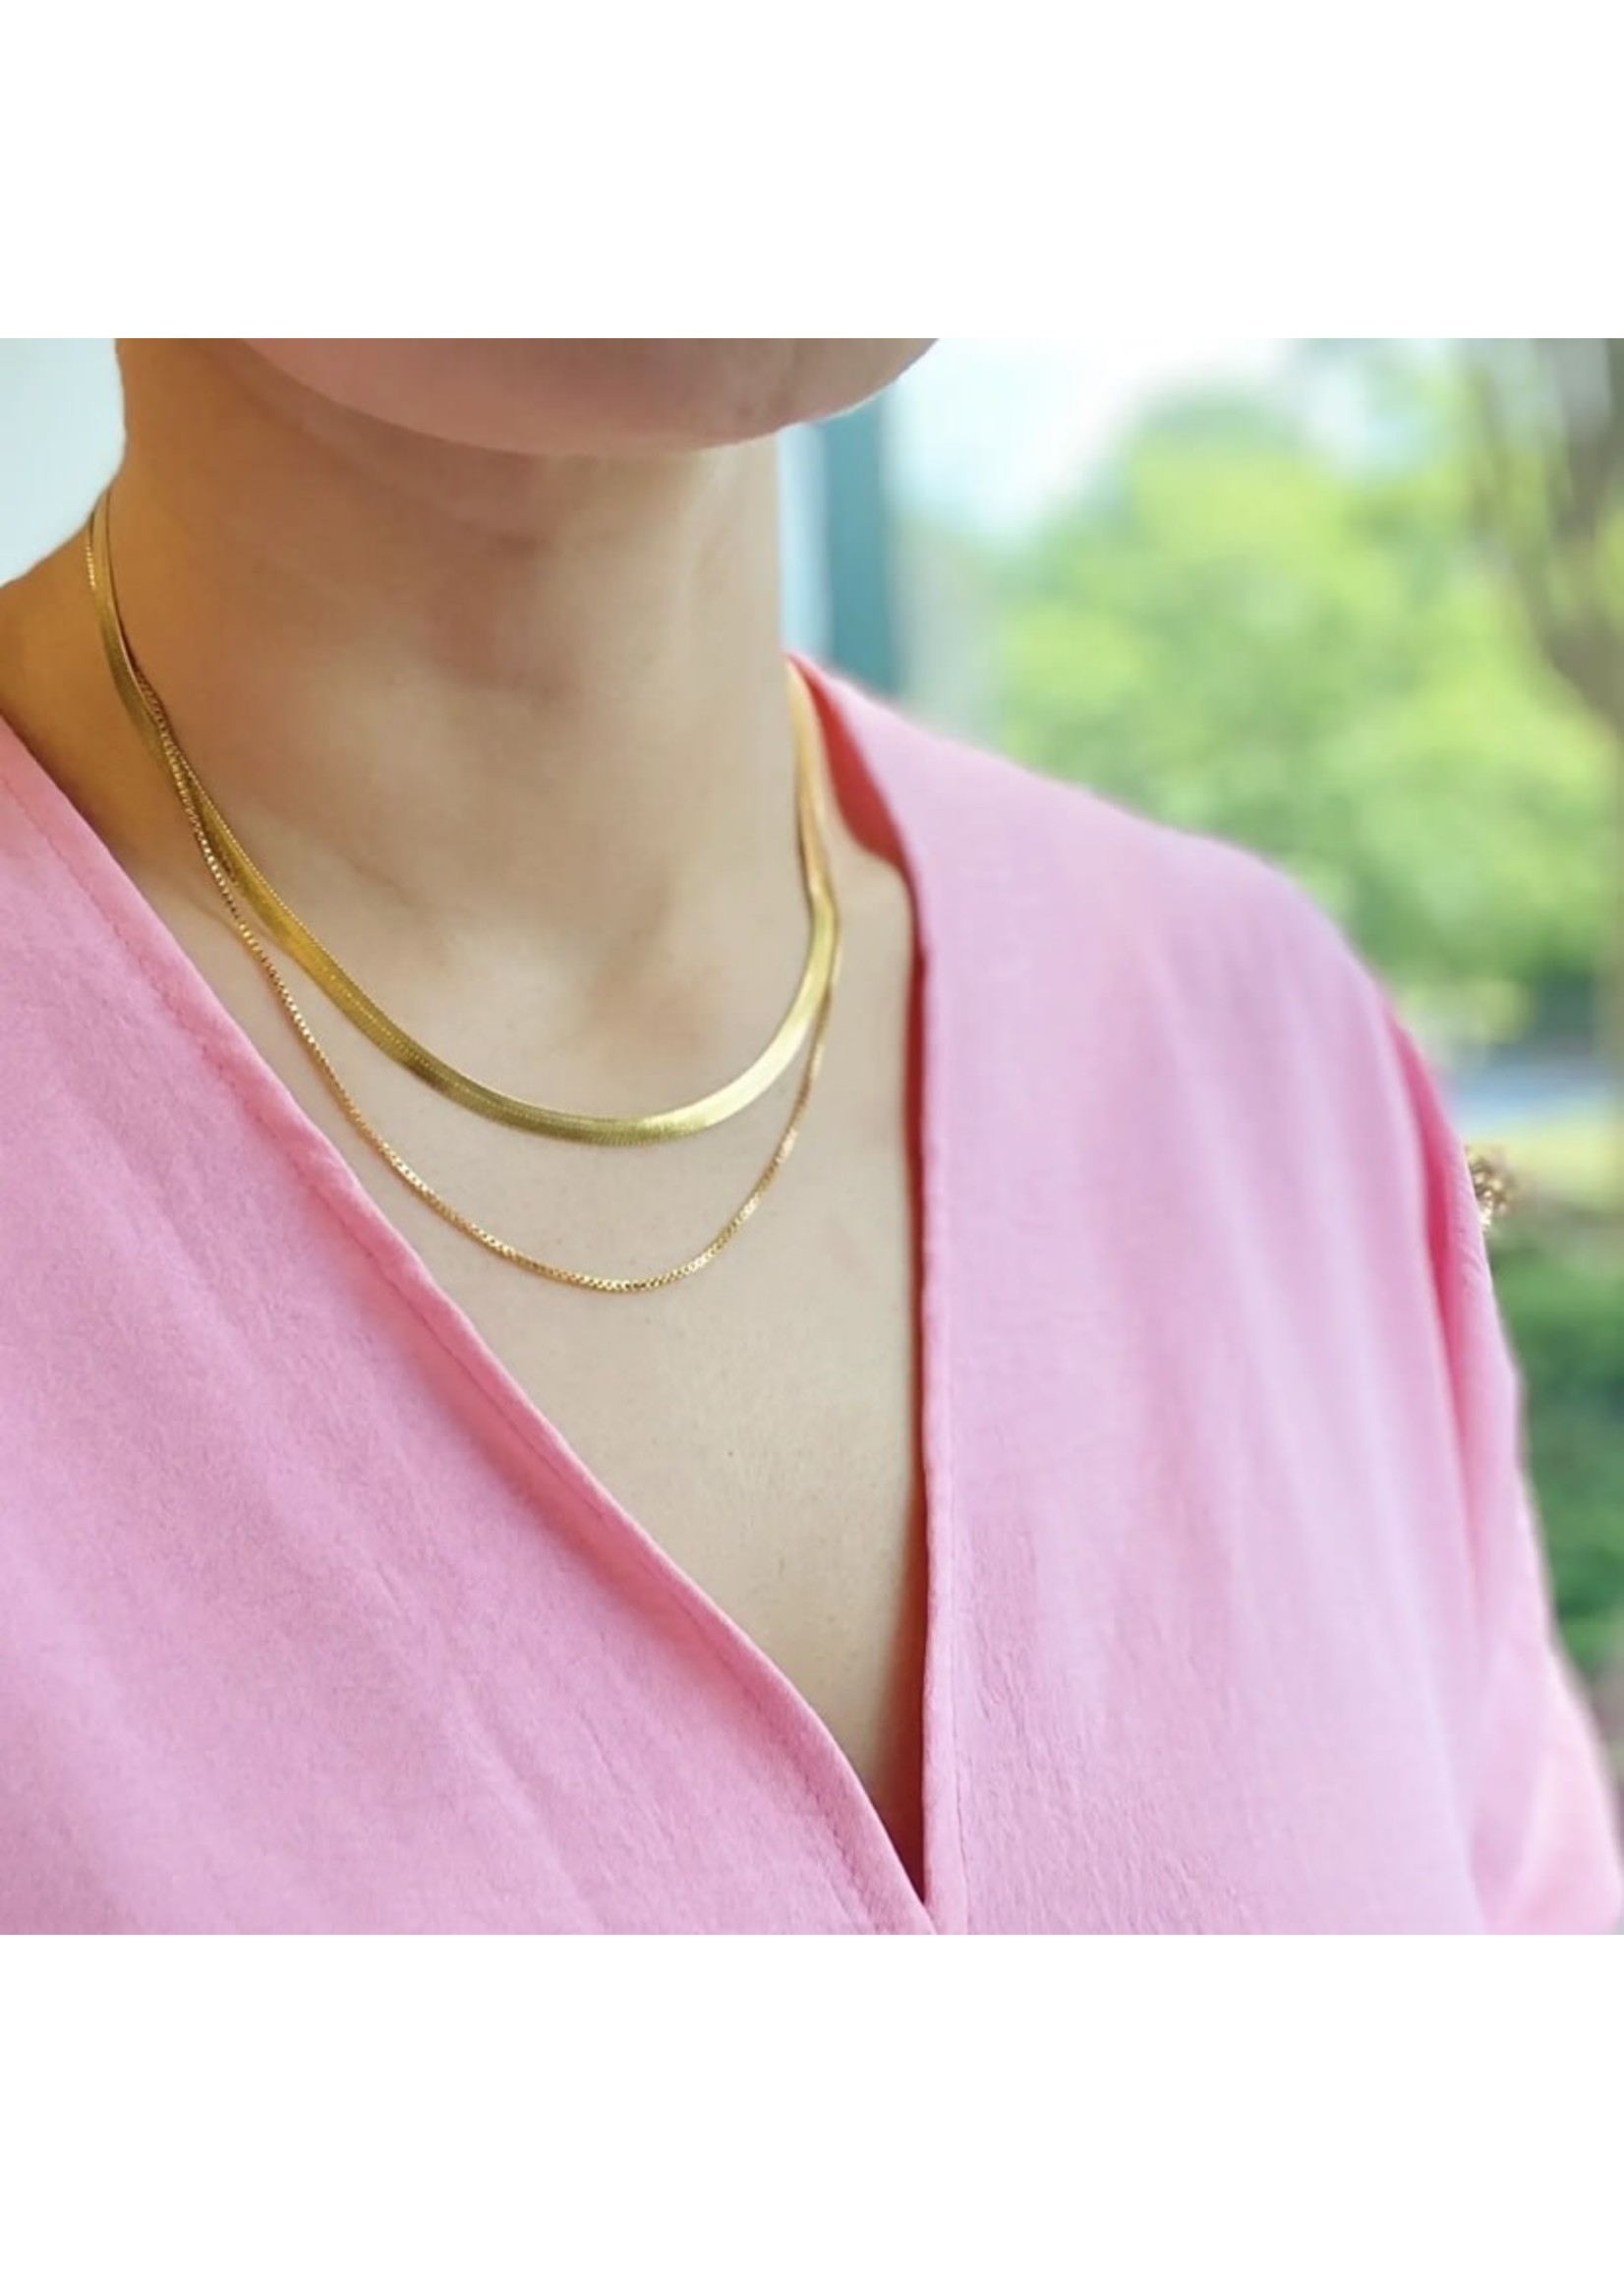 Ellison+Young Layered Herringbone Chain Necklace